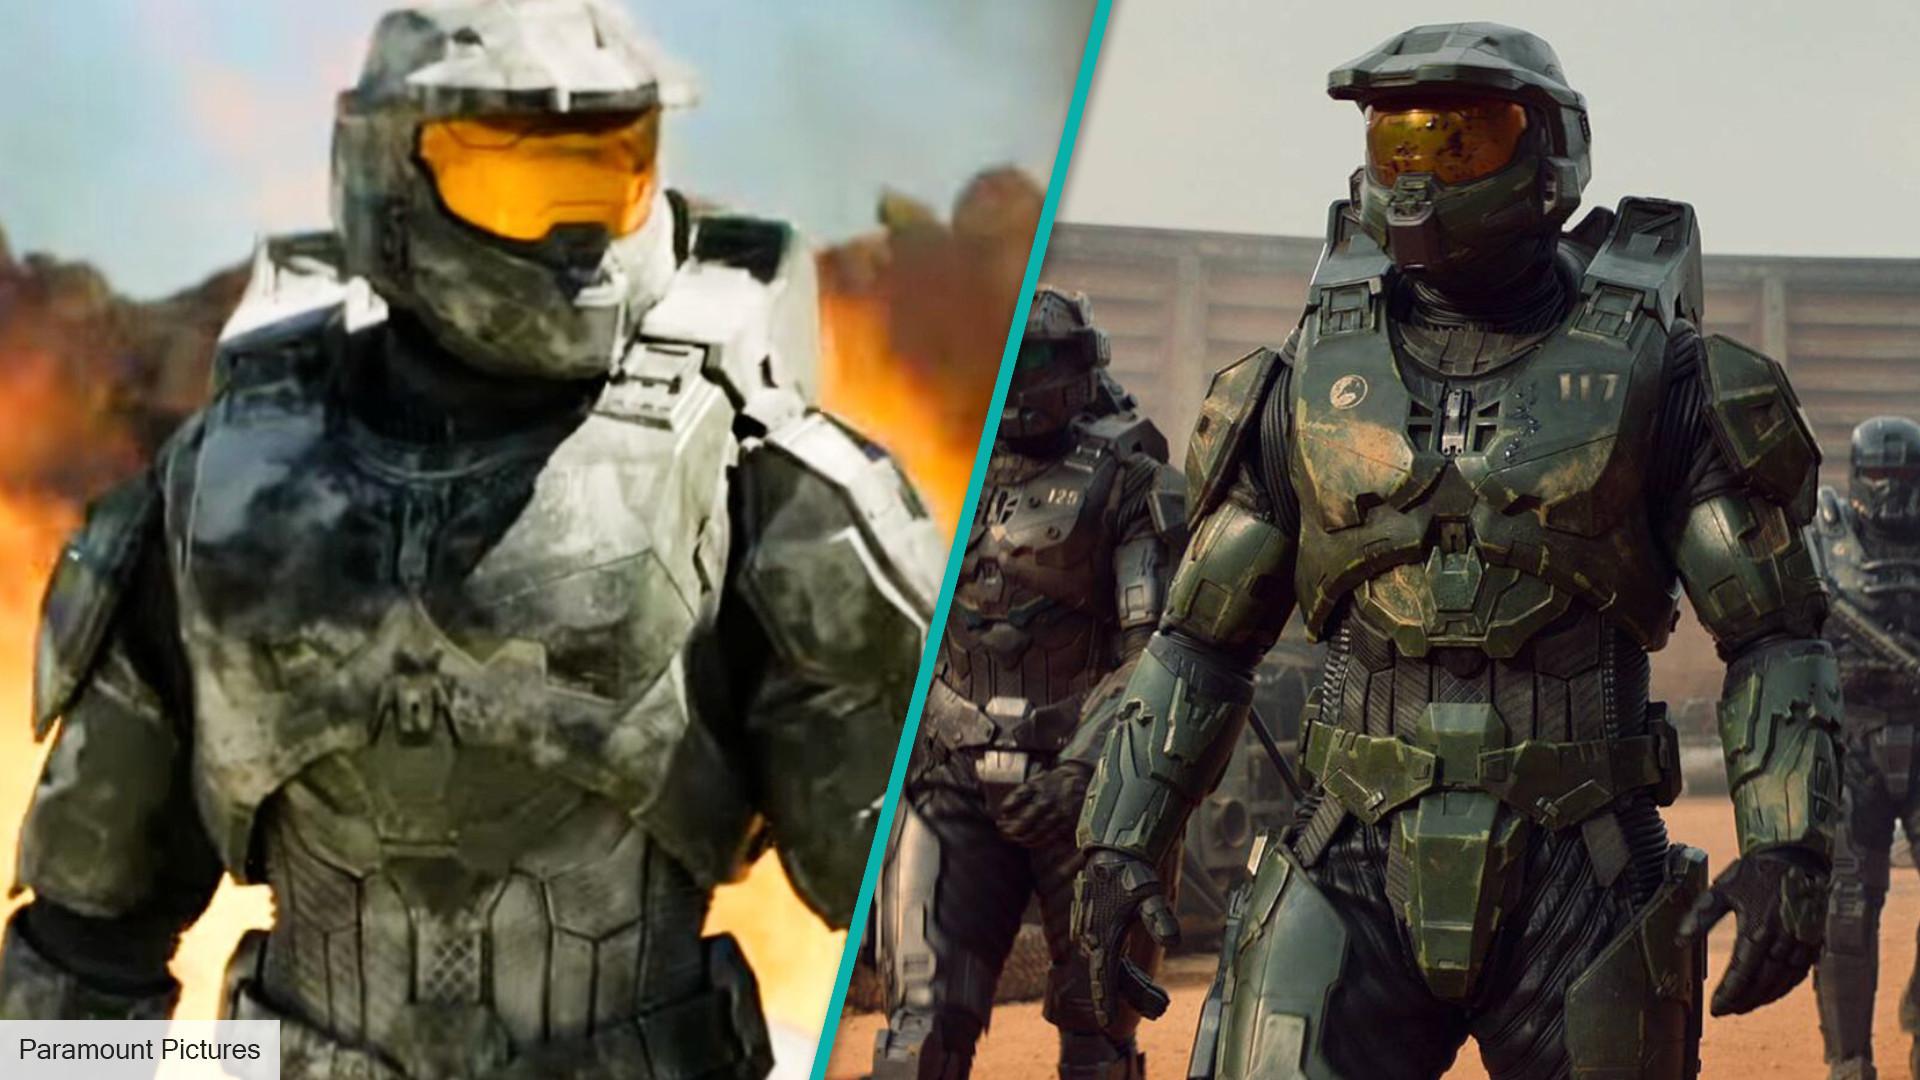 The Halo TV show is already renewed for a second season - The Verge